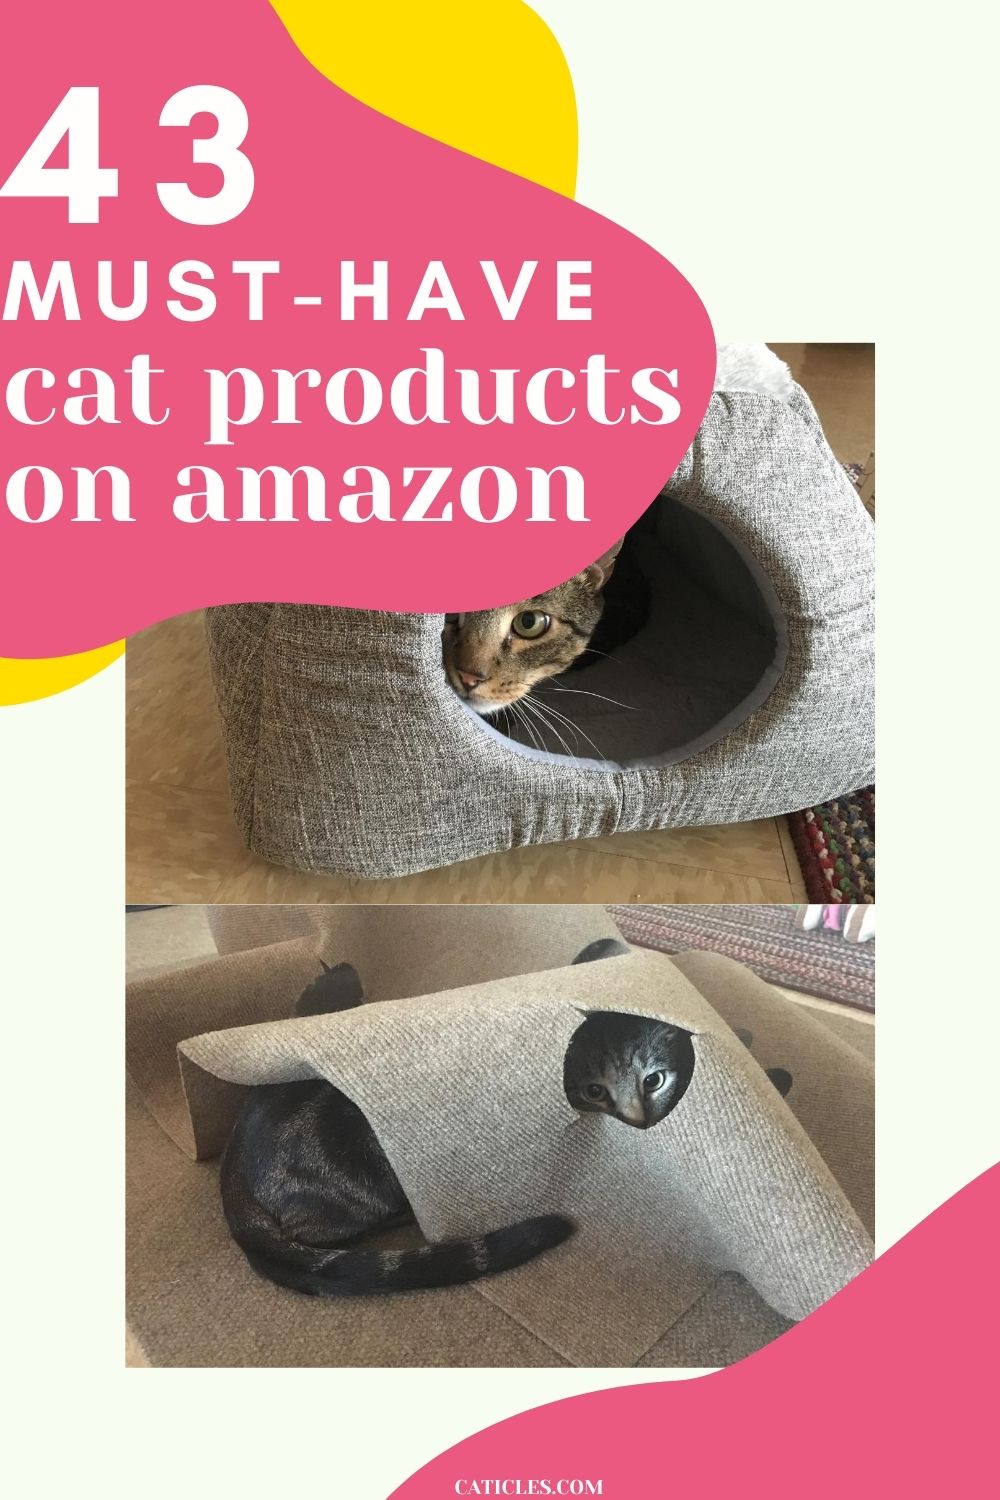 pin image 43 must have cat products on amazon